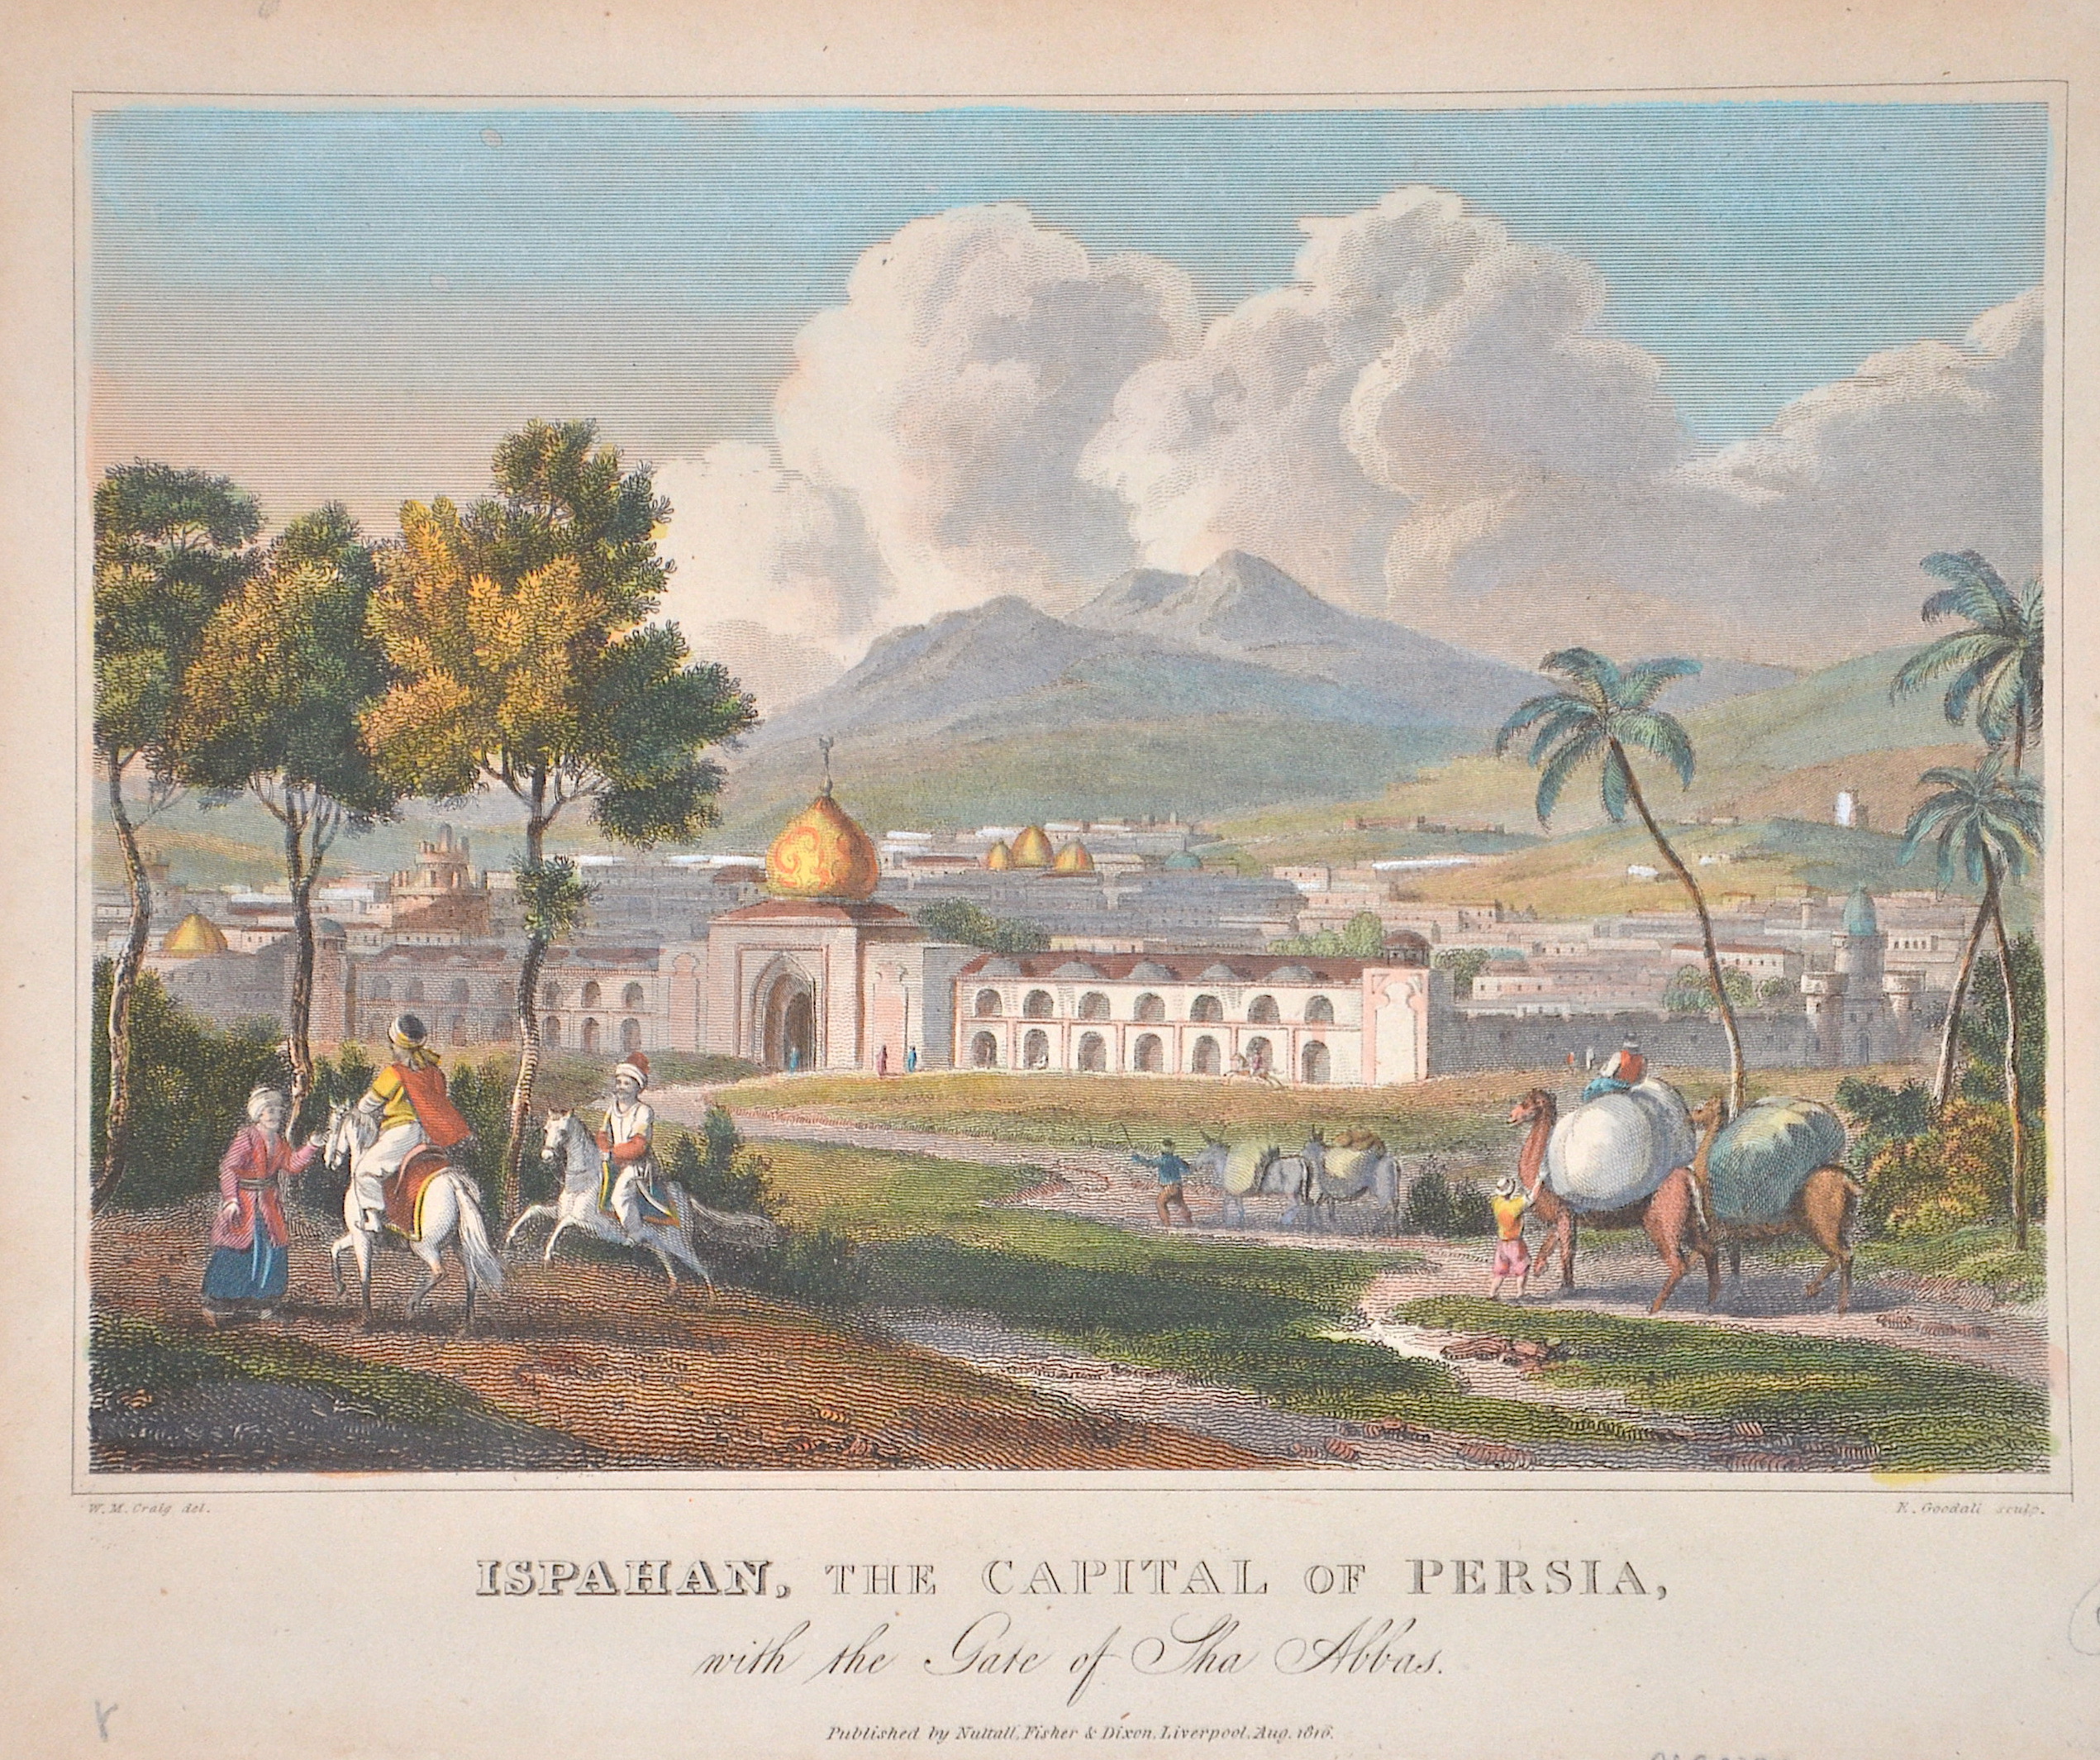 Goodall E. Isphahan, The Capital of Persia with the gate Gate of the Sha Abbas